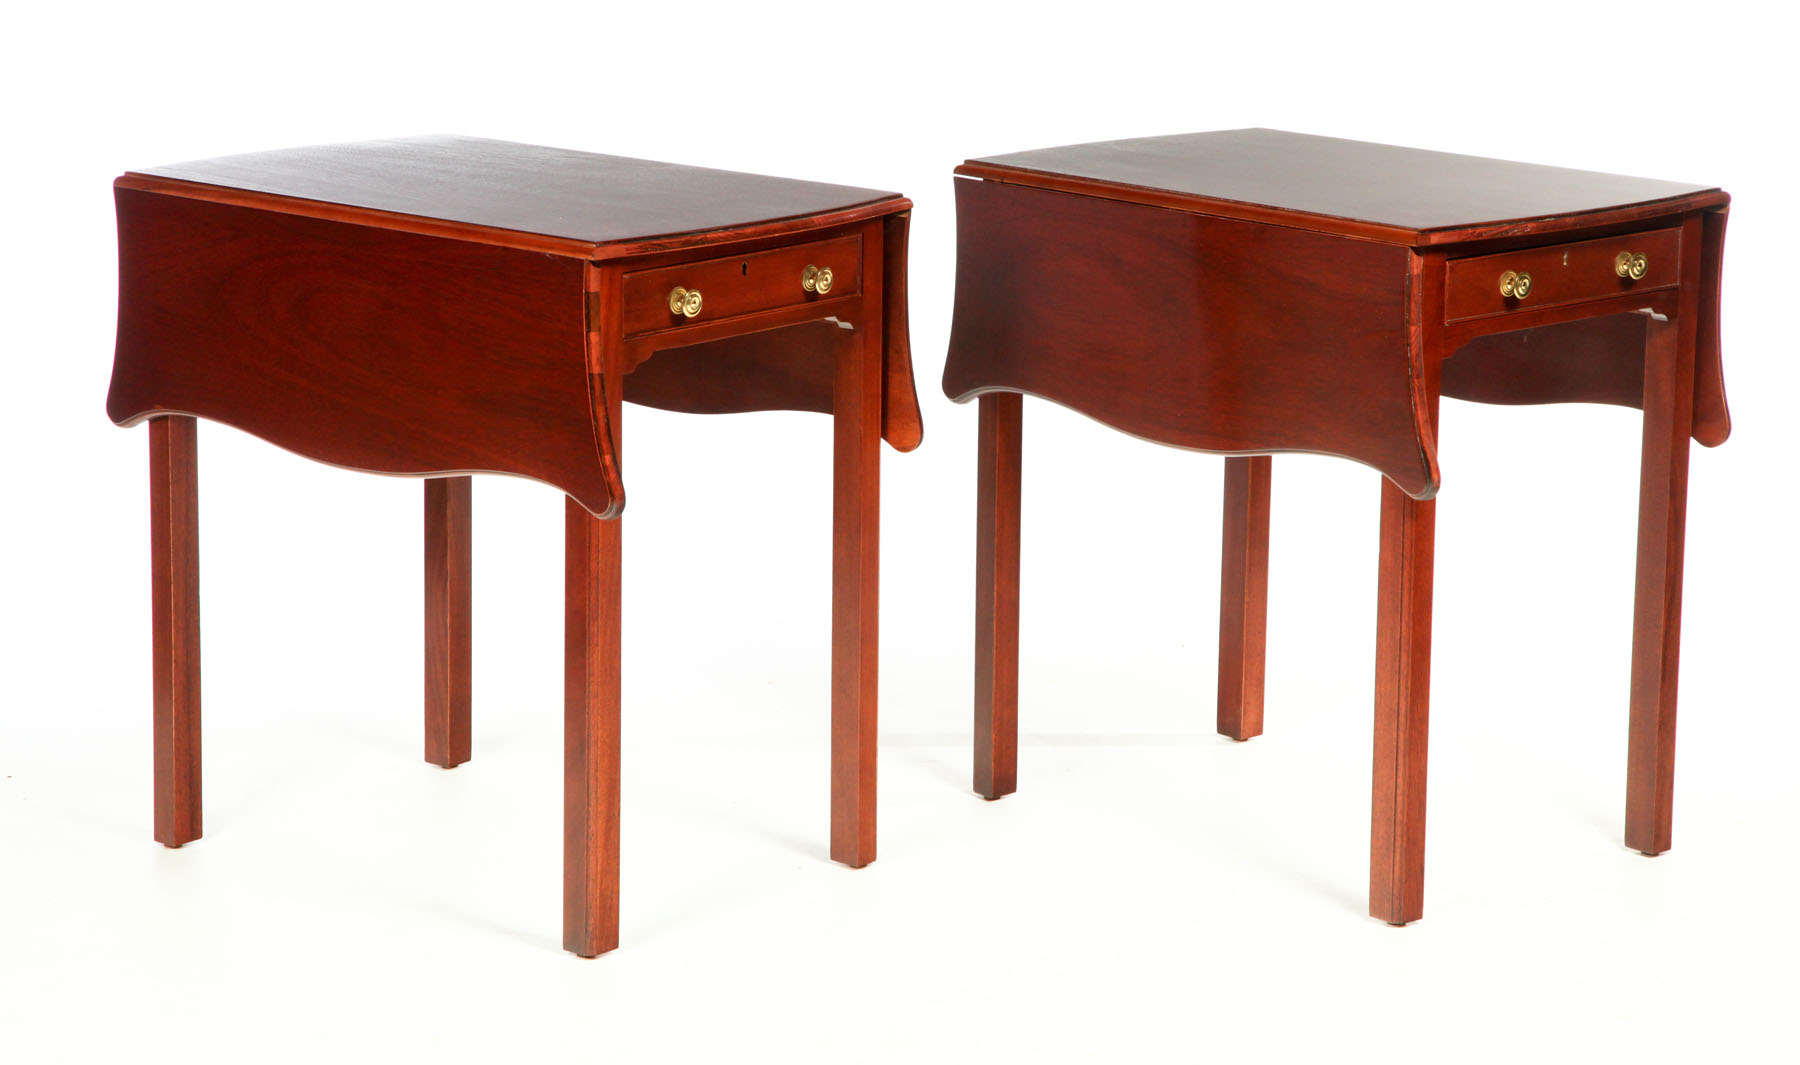 PAIR OF PEMBROKE-STYLE END TABLES.